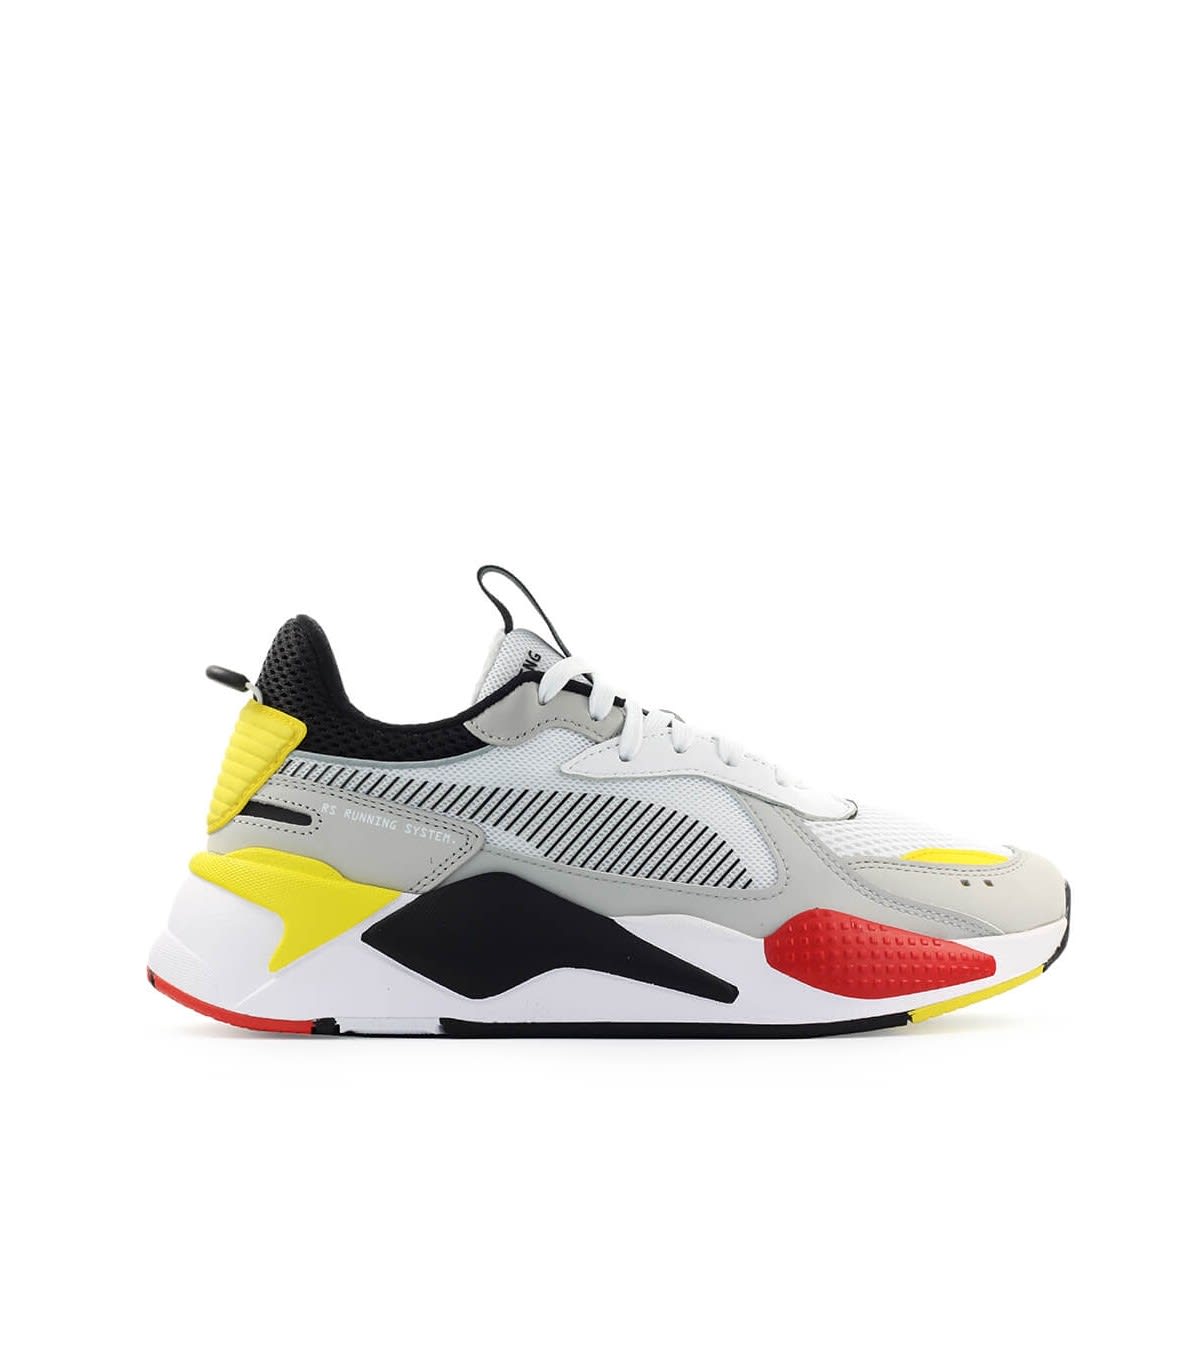 Puma Rs-x Toys Black Yellow Red Sneaker 